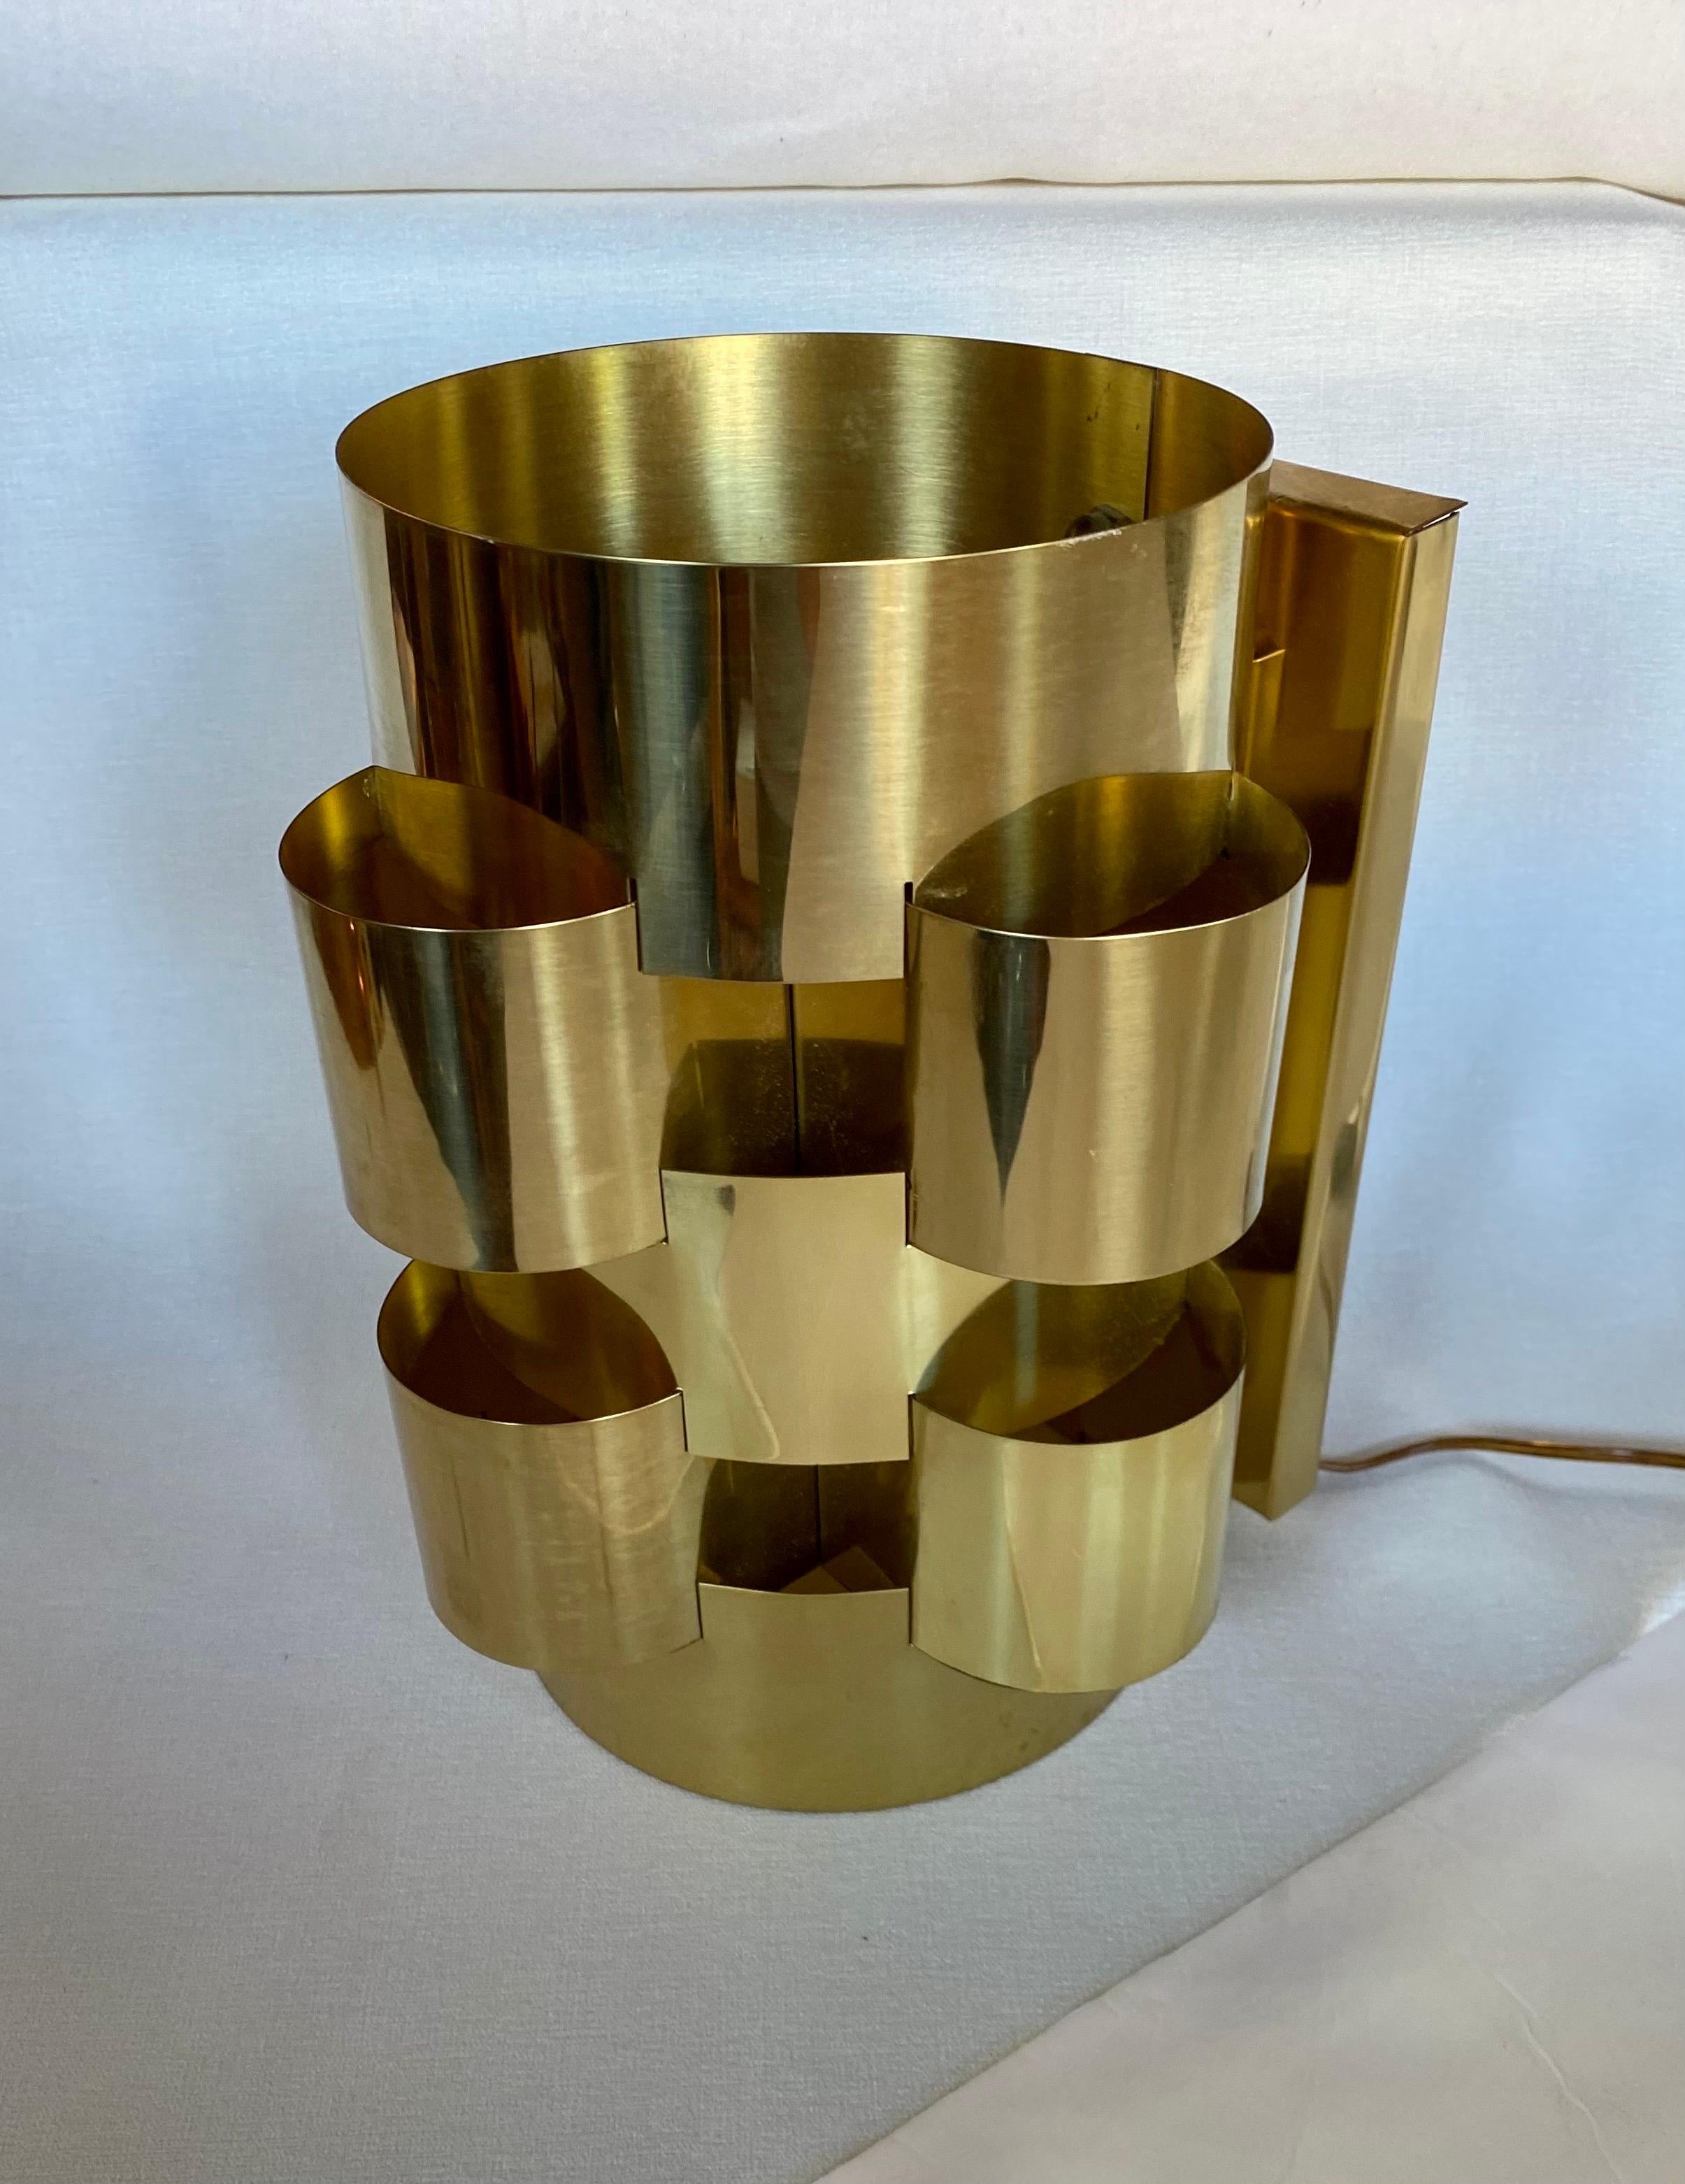 Fabulous, lacquered brass cloud wall sconce light fixture by Curtis Jere. This sculptural postmodern wall lamp features a reflective city scape style polished brass finish. A truly unique design, brutalist cityscape style. 

Signed and dated 